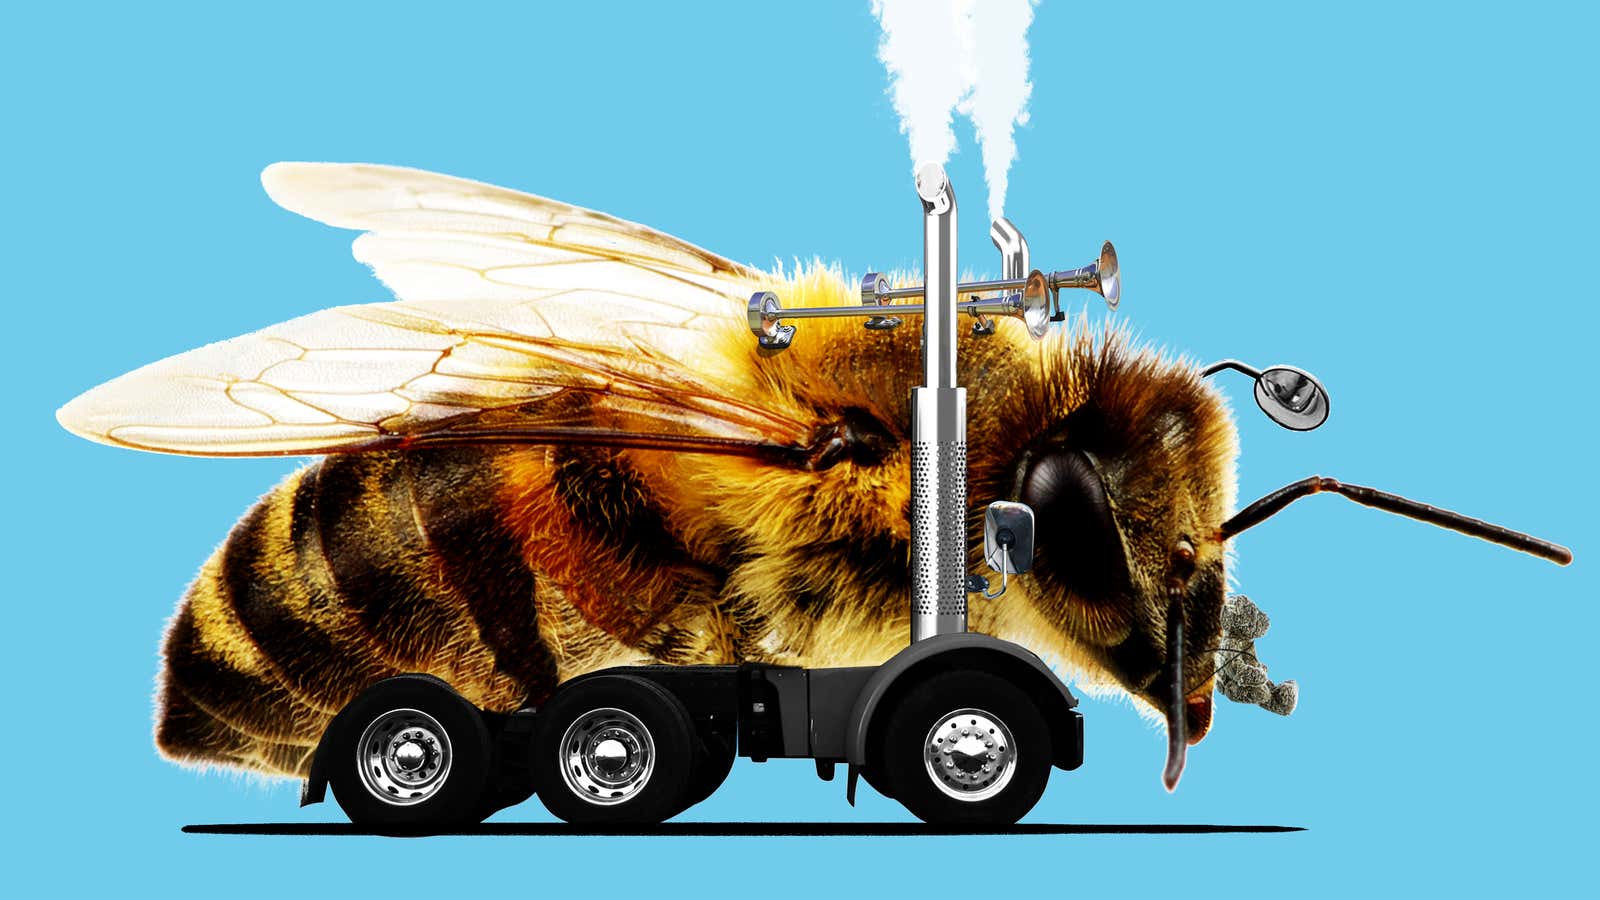 That Big Rig You're Passing Might Be Full of Bees